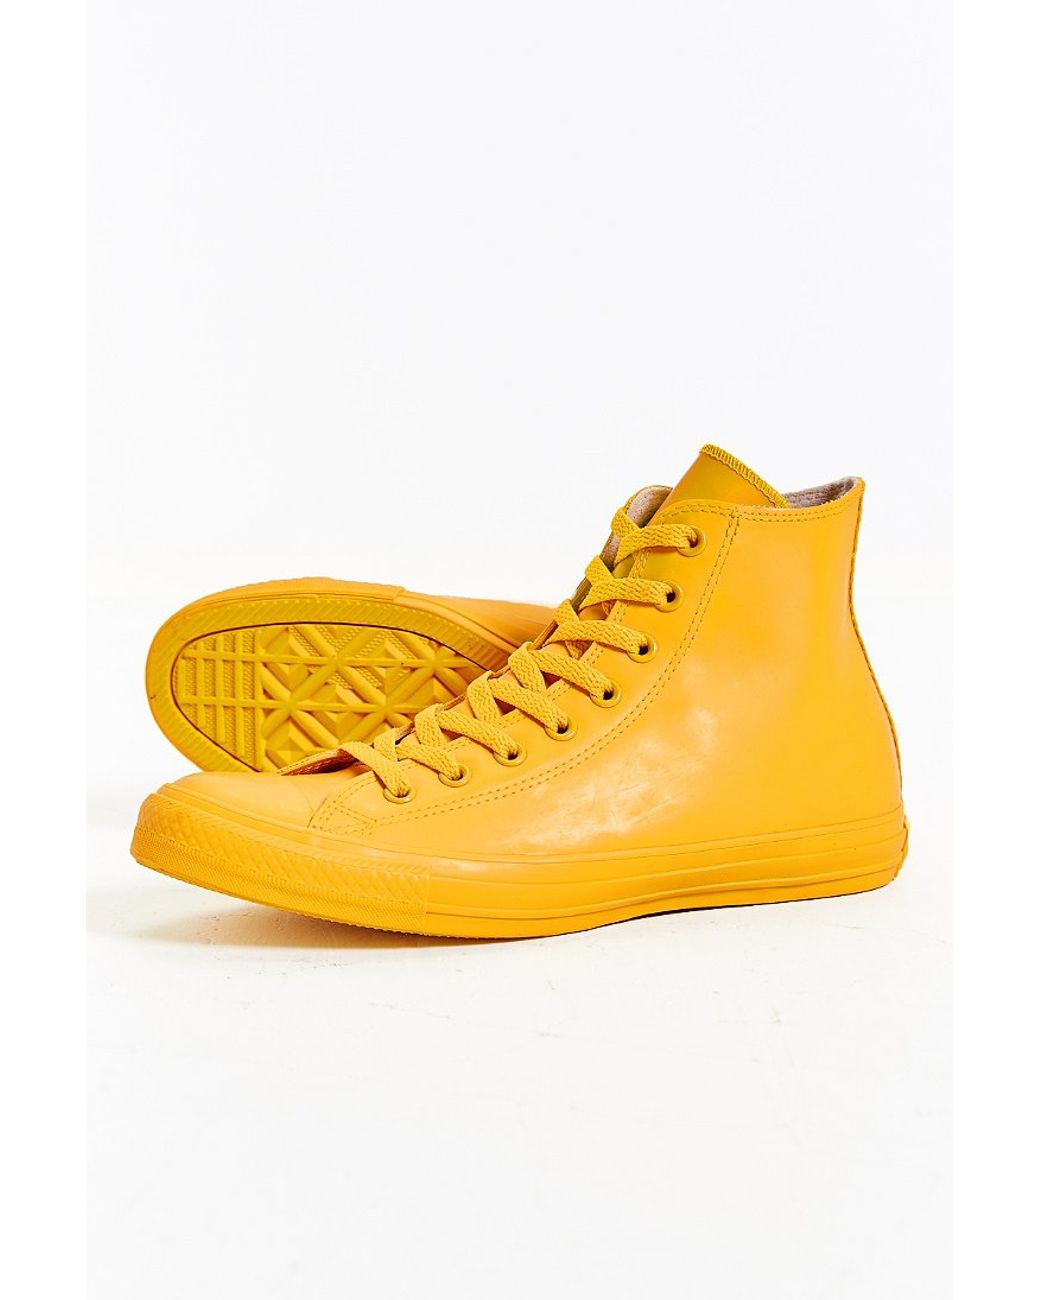 Chuck Taylor All Star High-top Sneakerboot Yellow for Men Lyst